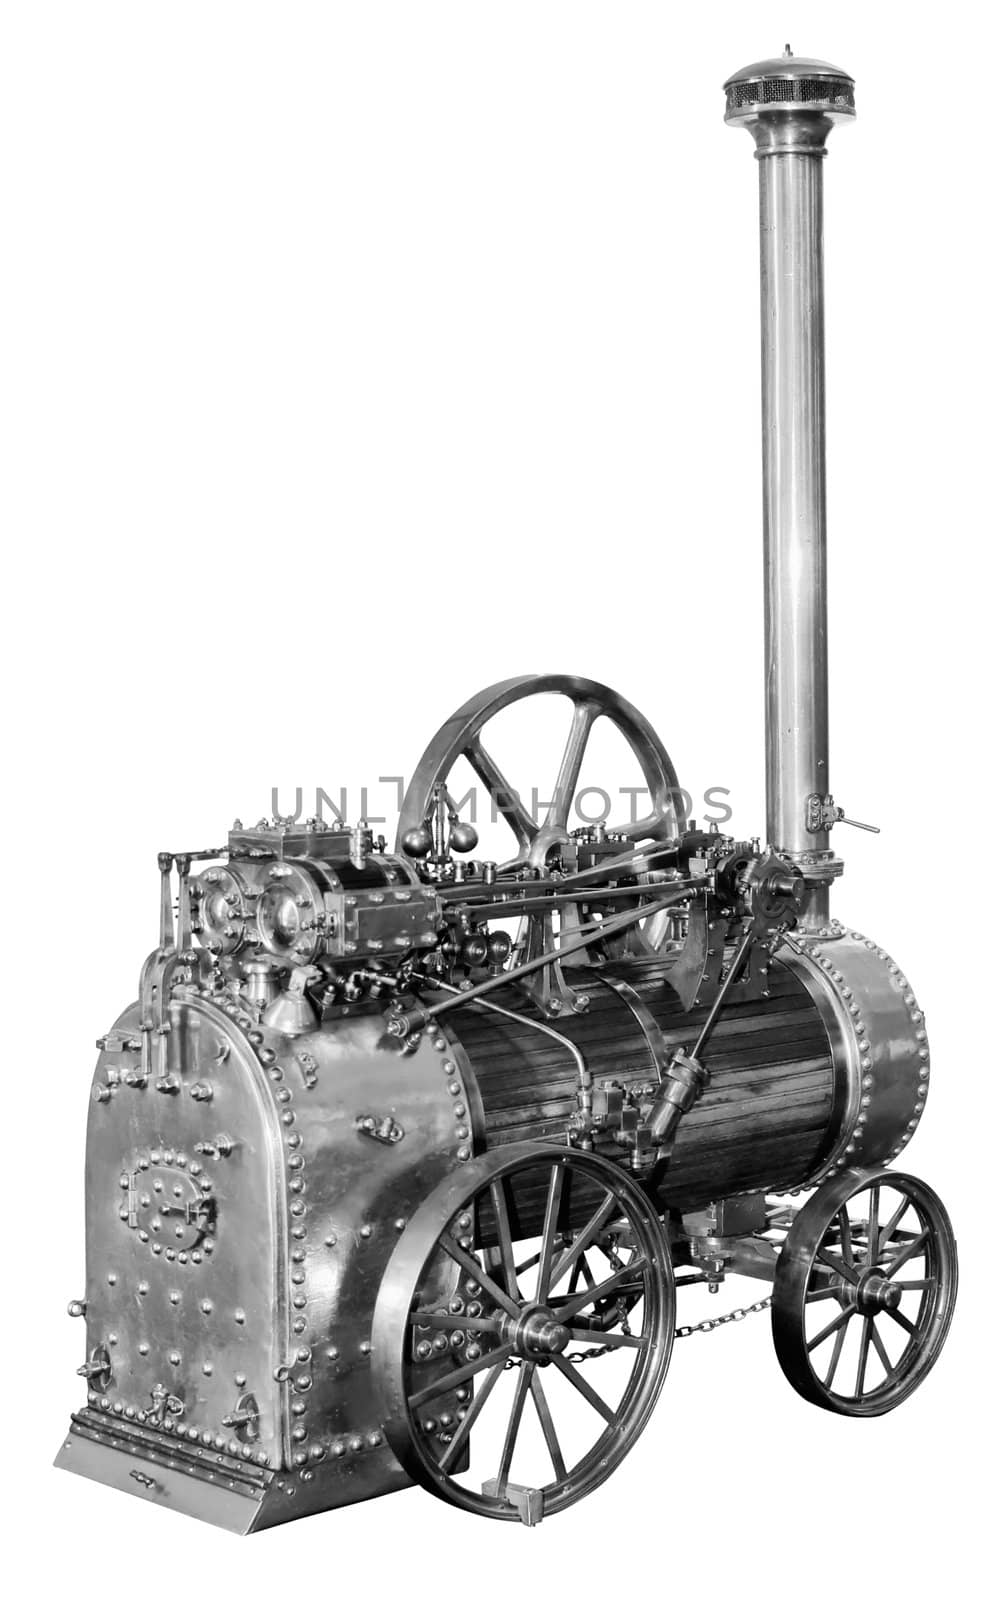 model of an ancient steam engine